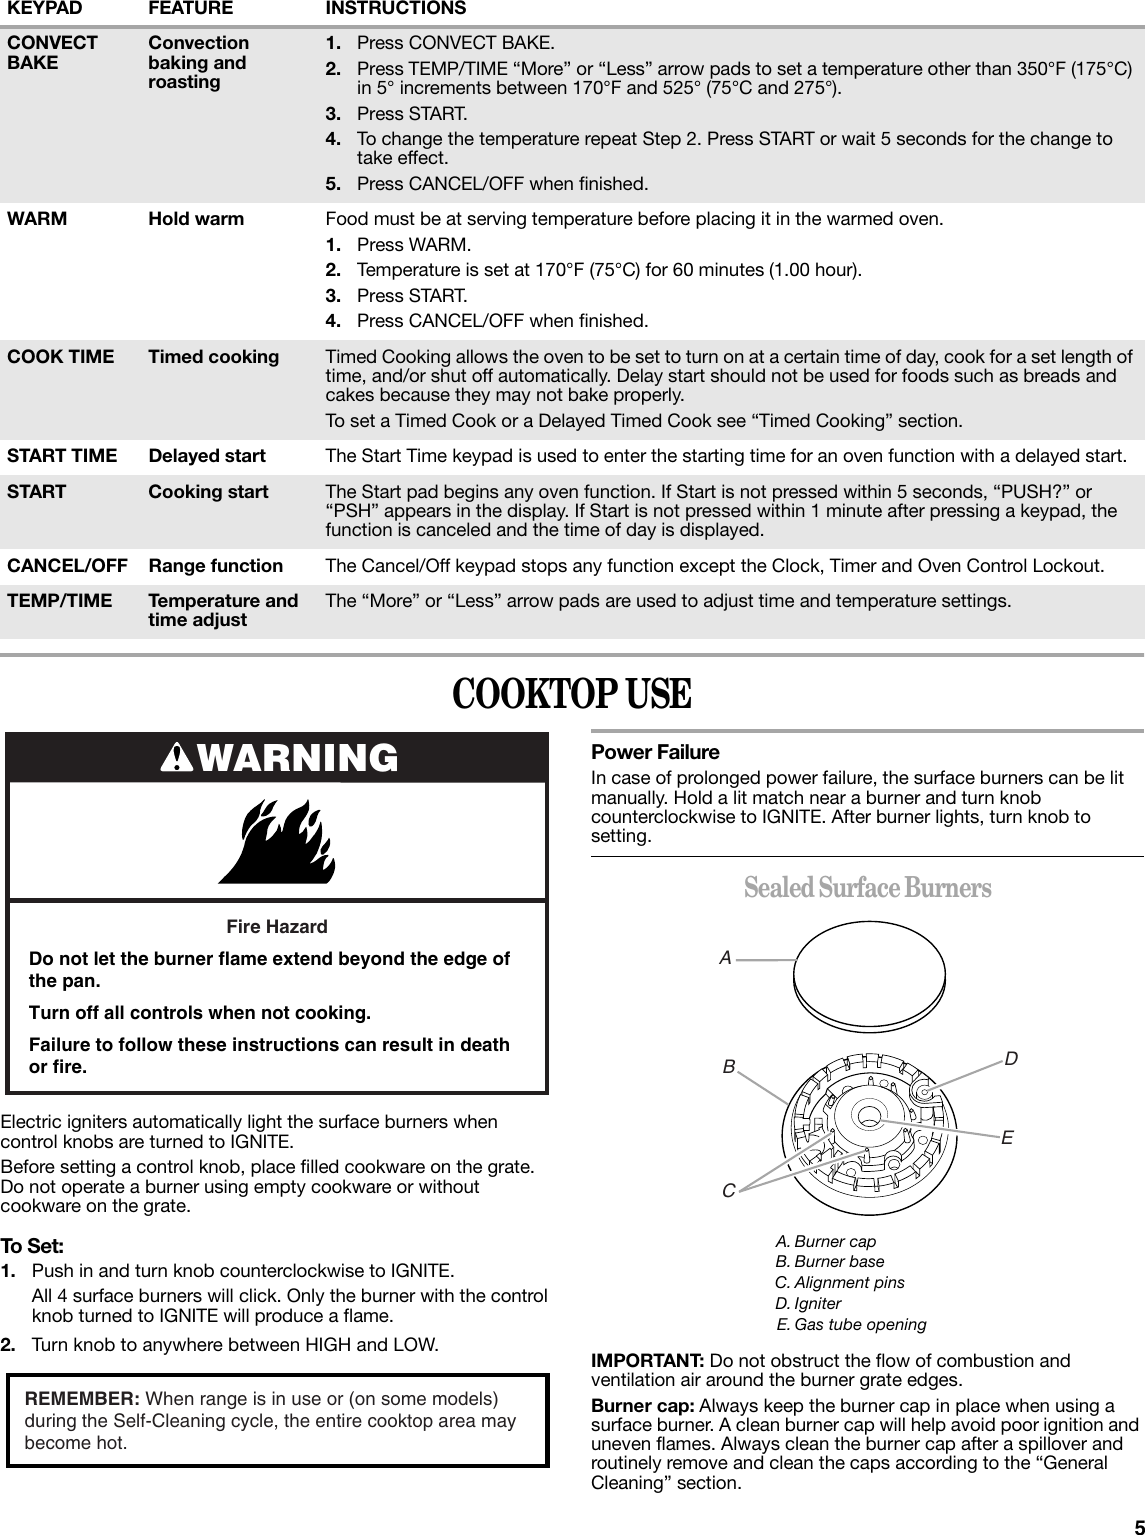 Page 5 of 12 - Amana AGR5844VDW User Manual  To The 53254204-a857-4e8d-90a1-9af2f4d37c3f